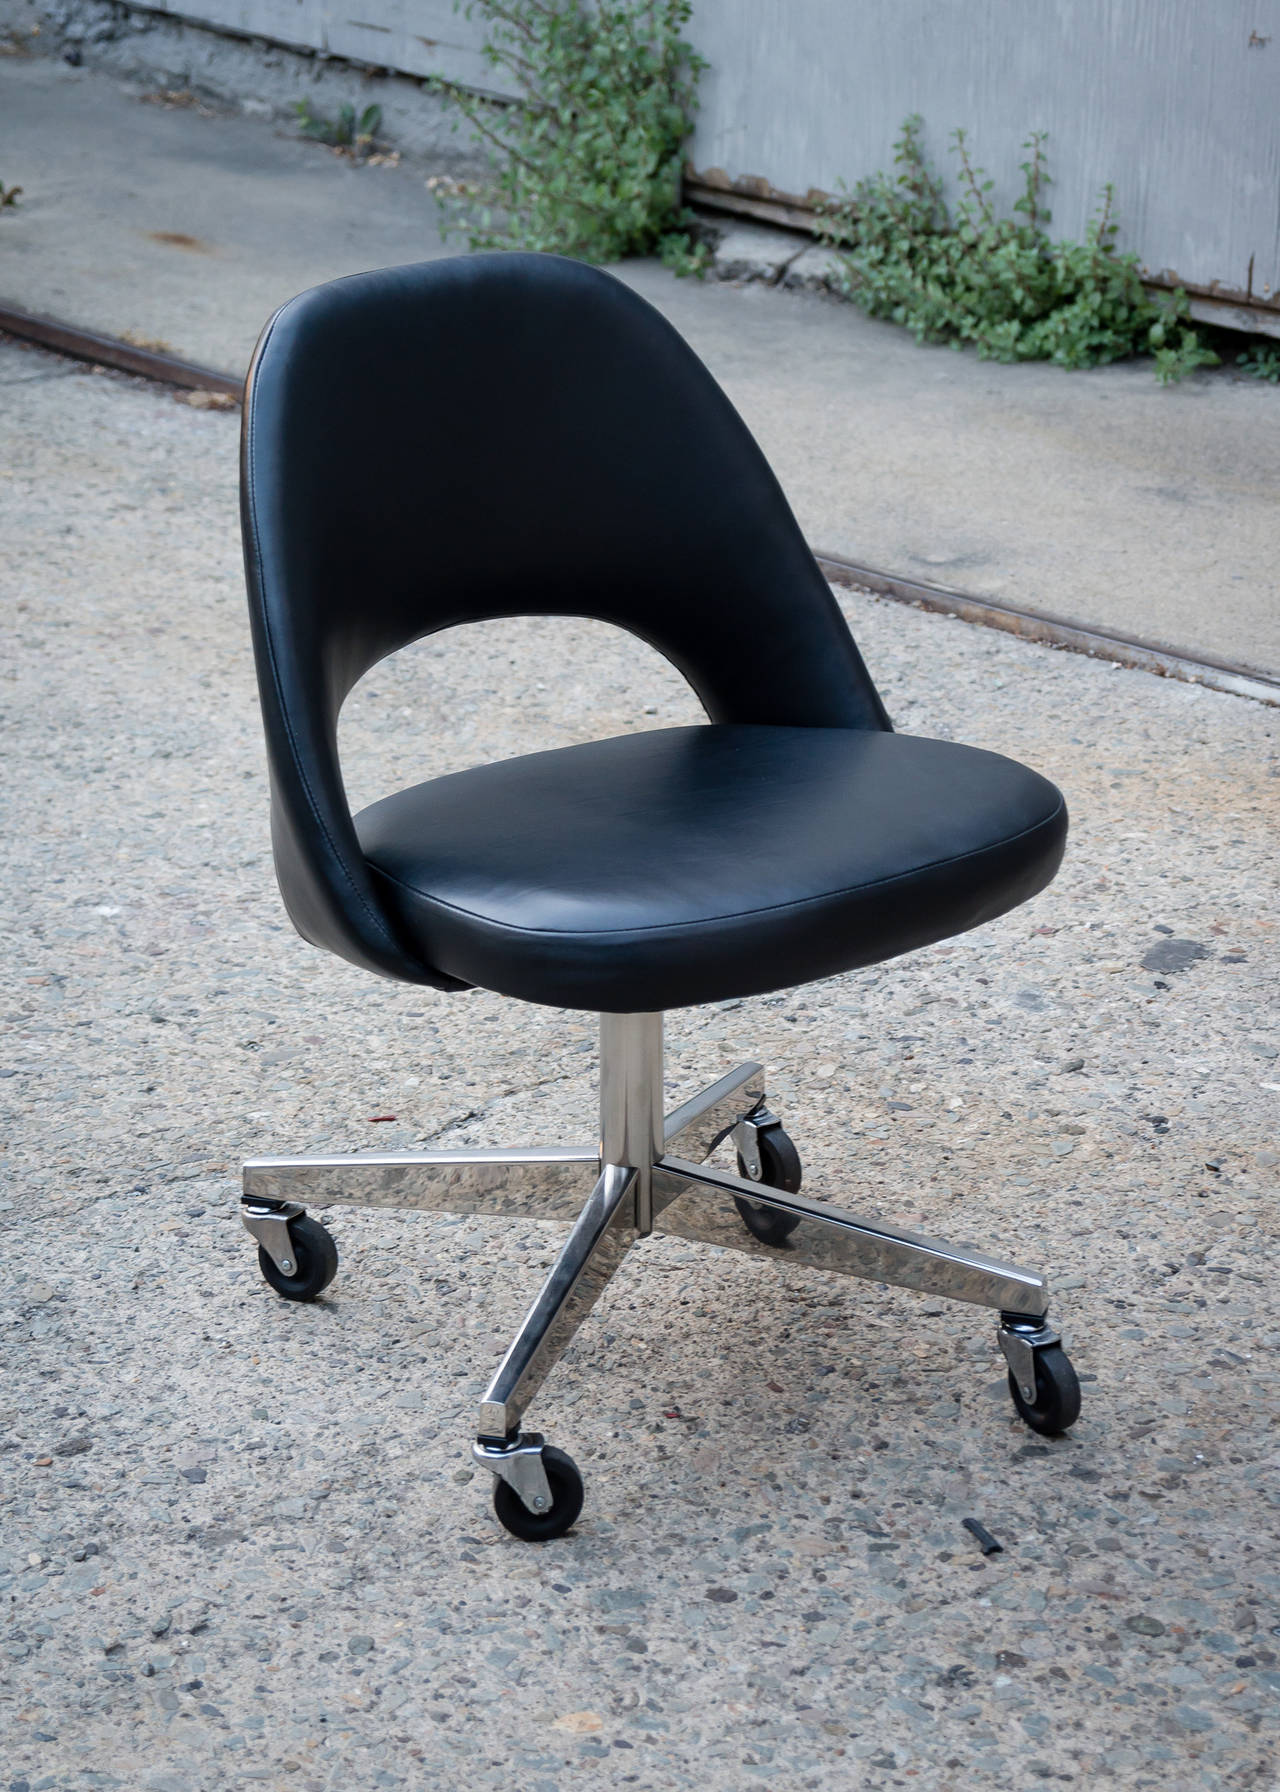 Eero Saarinen vintage leather executive desk chair with casters designed for Knoll, 1957.
Newly upholstered in top grade black leather and new latex foam.
Fully functioning base with adjustable height and adjustable reclining mechanism.
Molded